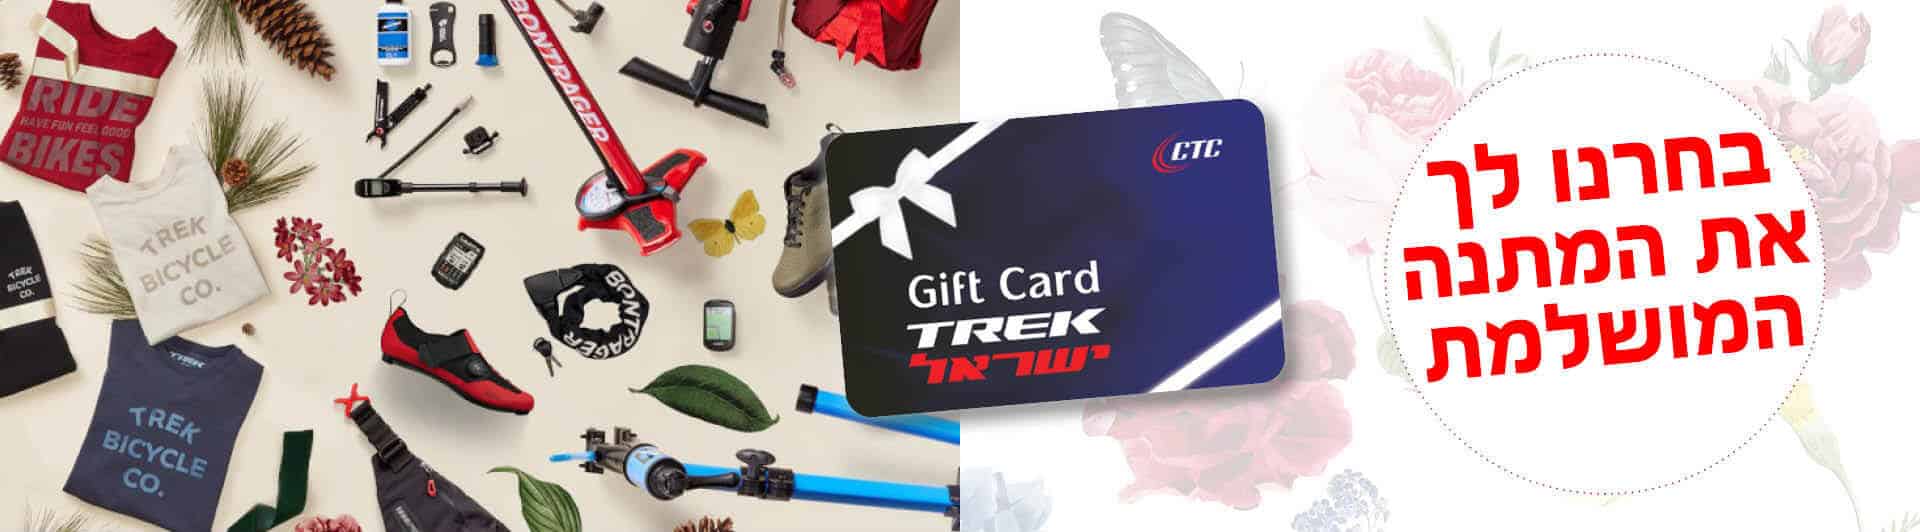 ctc gift card